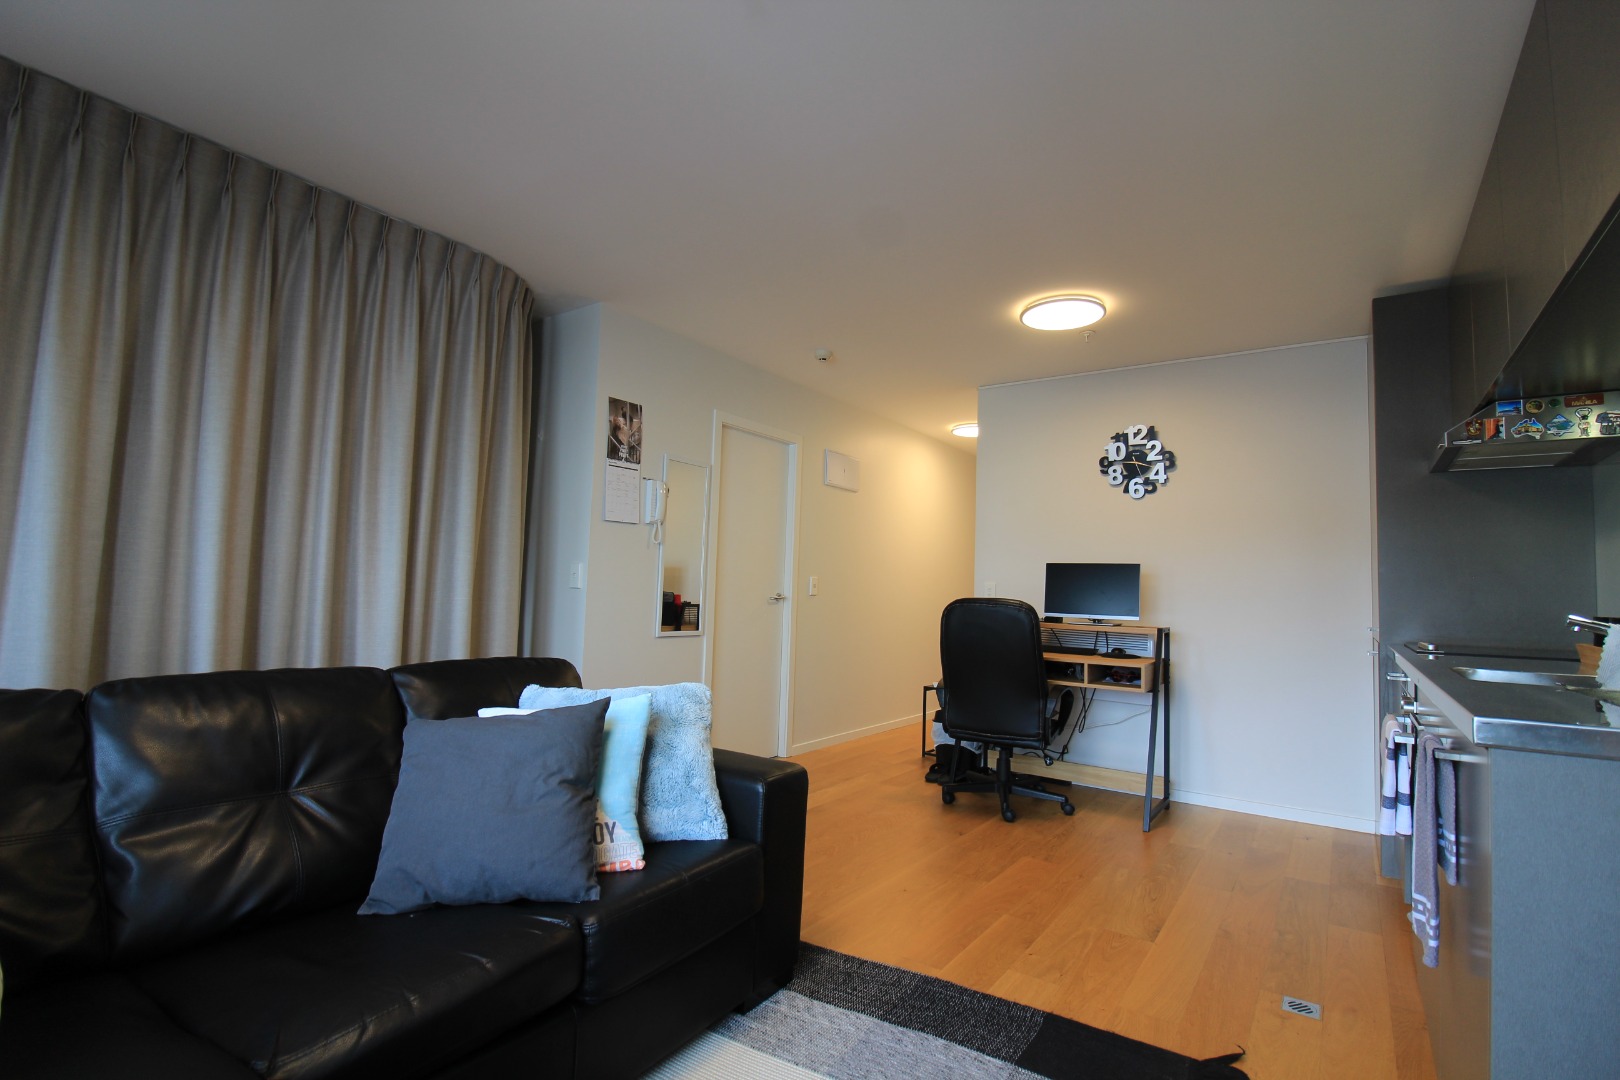 Real Estate For Rent Houses & Apartments : Modern 1 Bedroom Apartment, Wellington